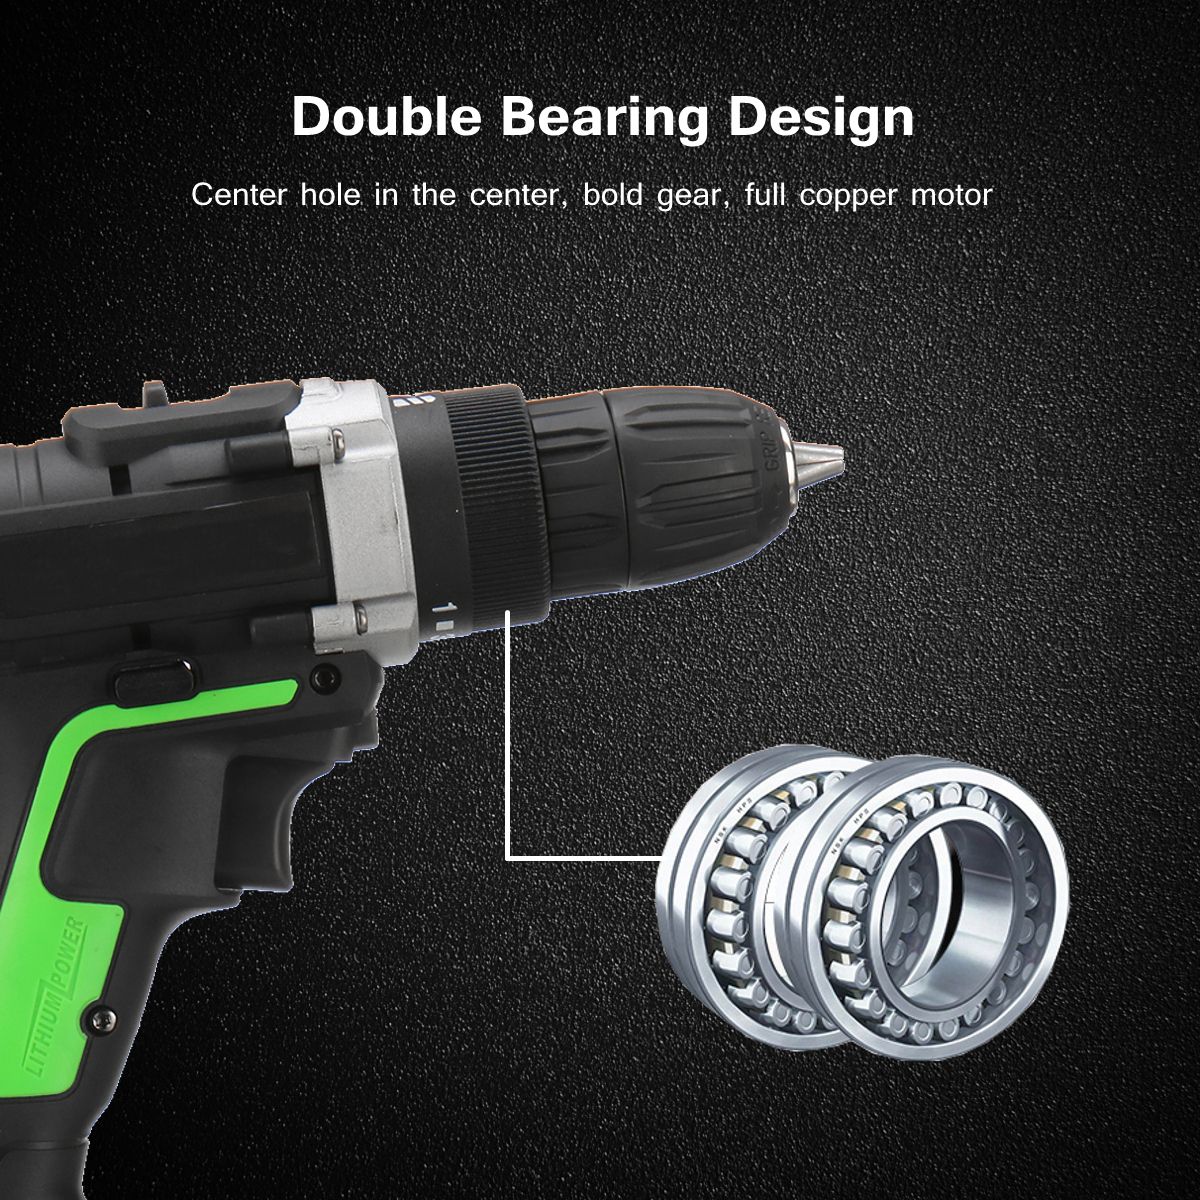 48V-3-In-1-Cordless-Power-Drills-151-Torque-Drilling-Tool-Dual-Speed-Electric-Screwdriver-Drill-W-1--1552730